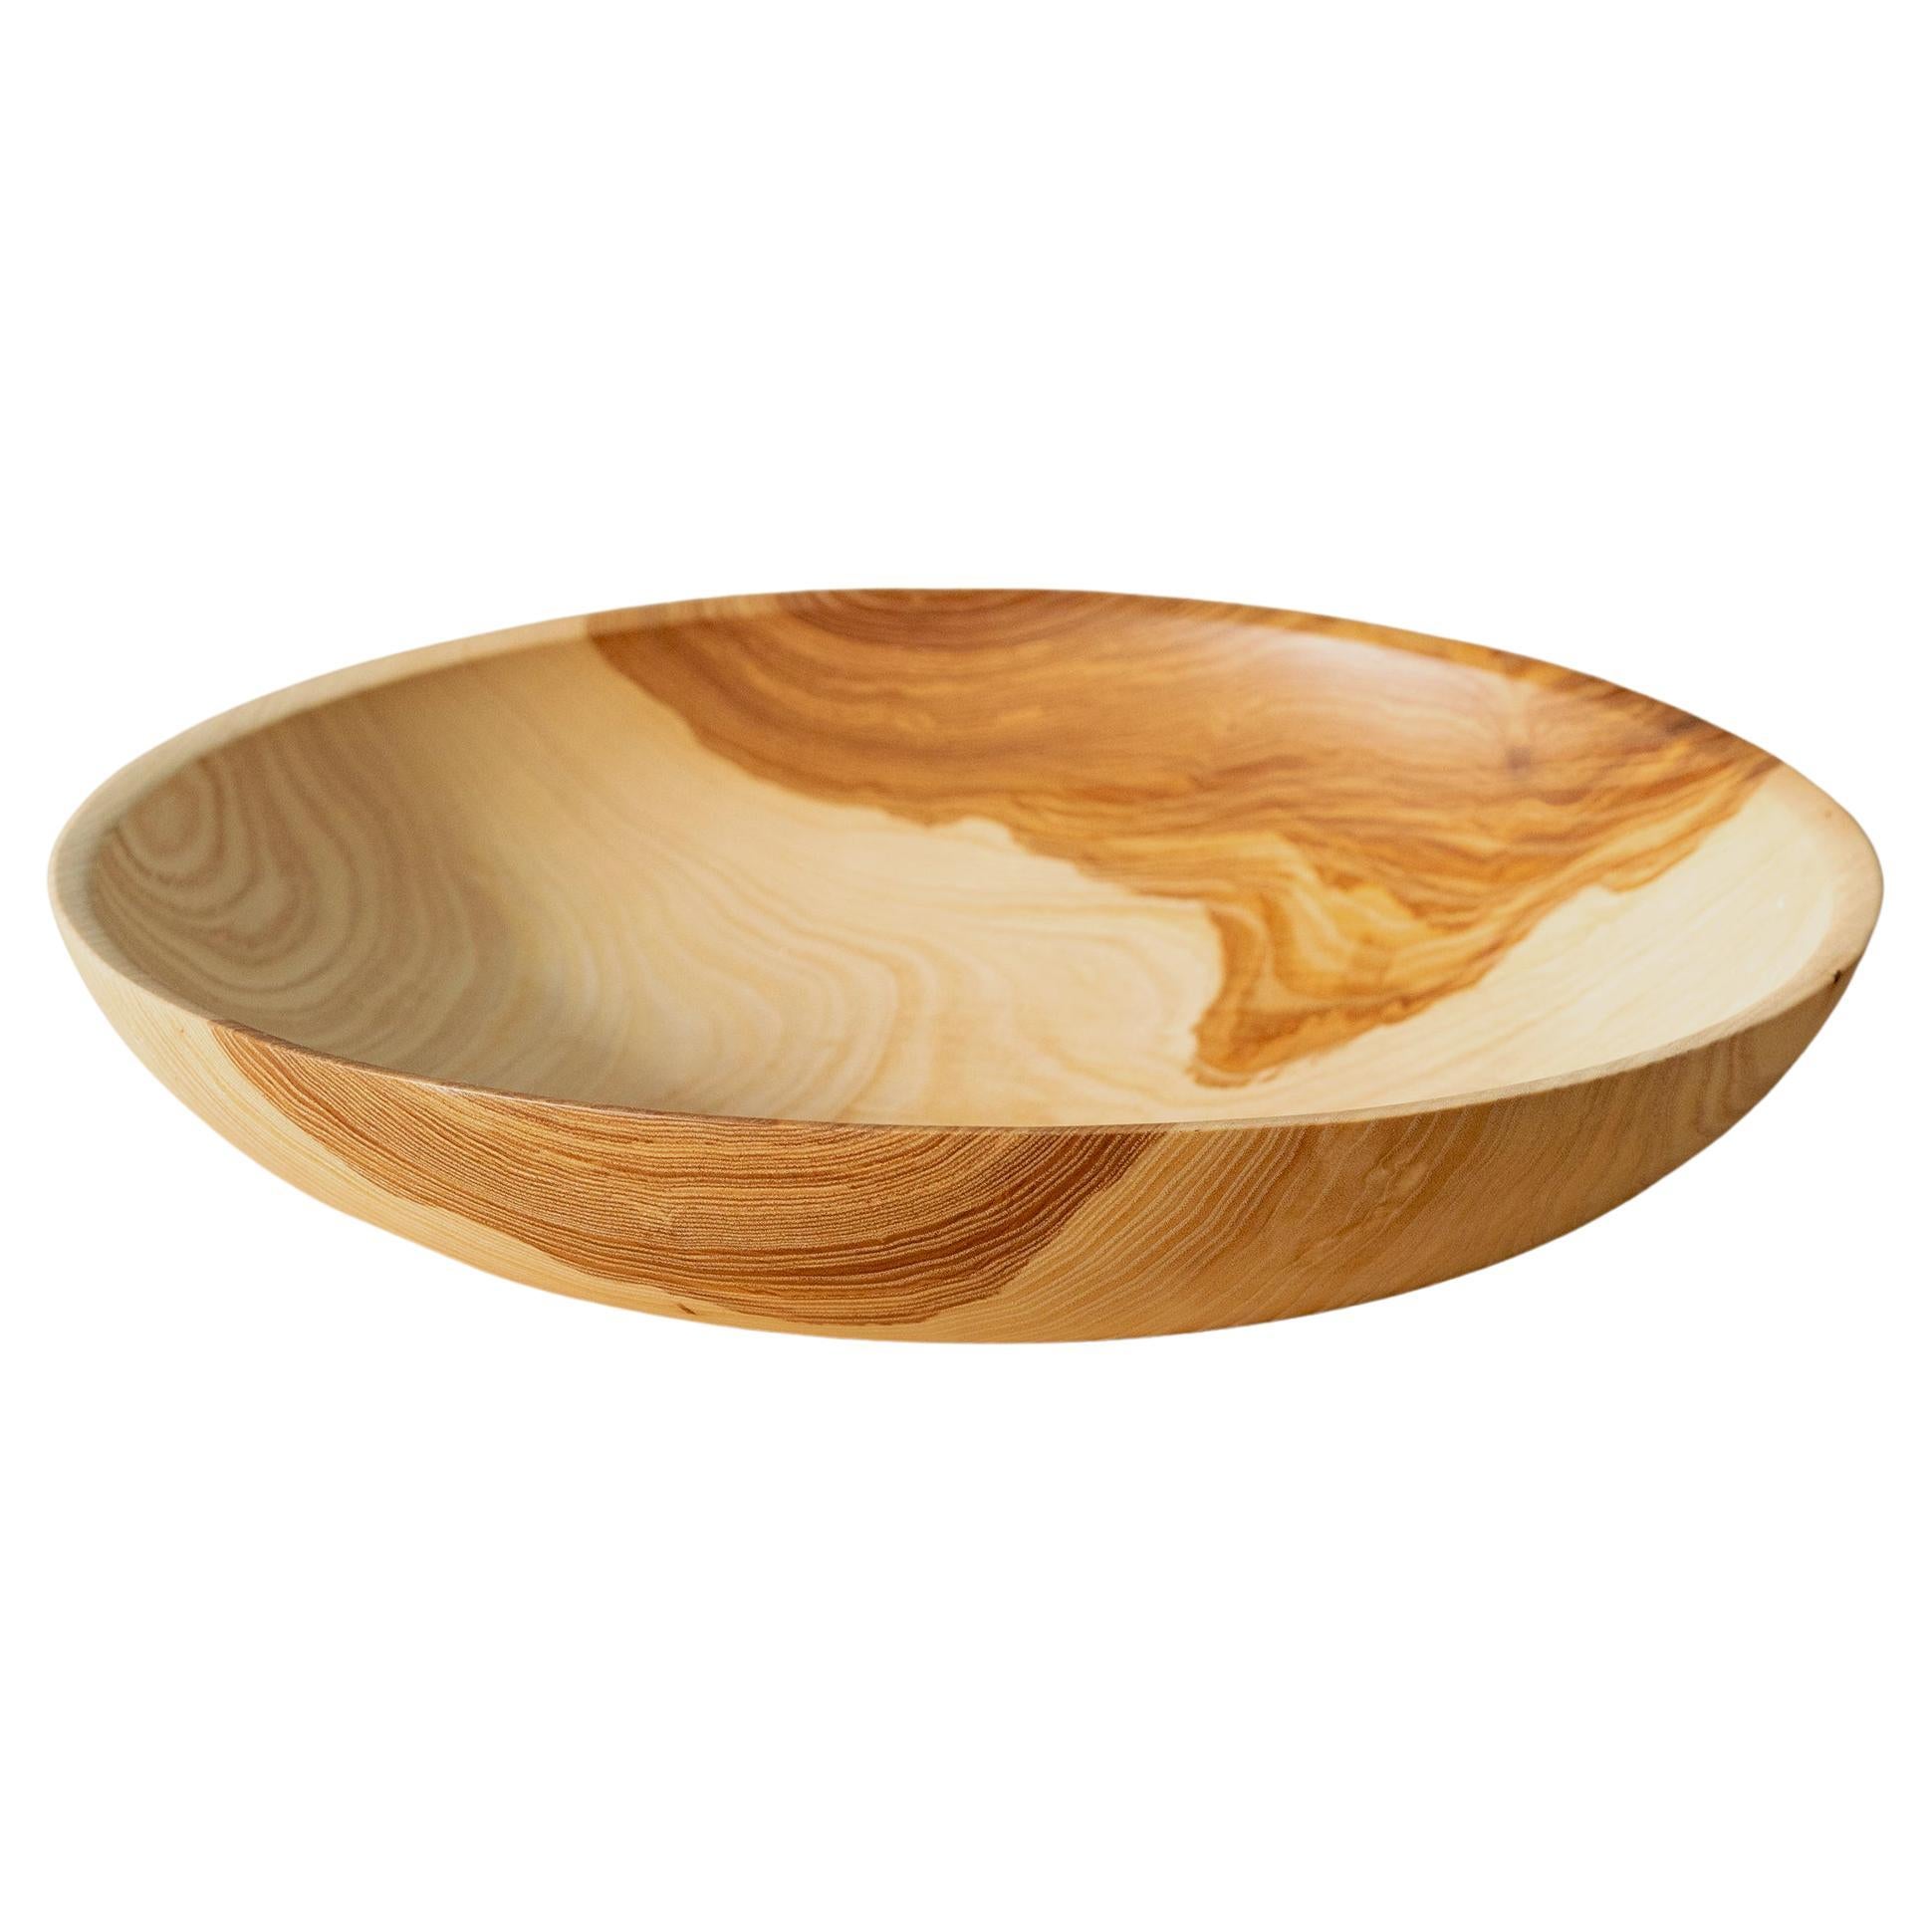 Hand-Carved Shallow Ash Wooden Fruit Bowl